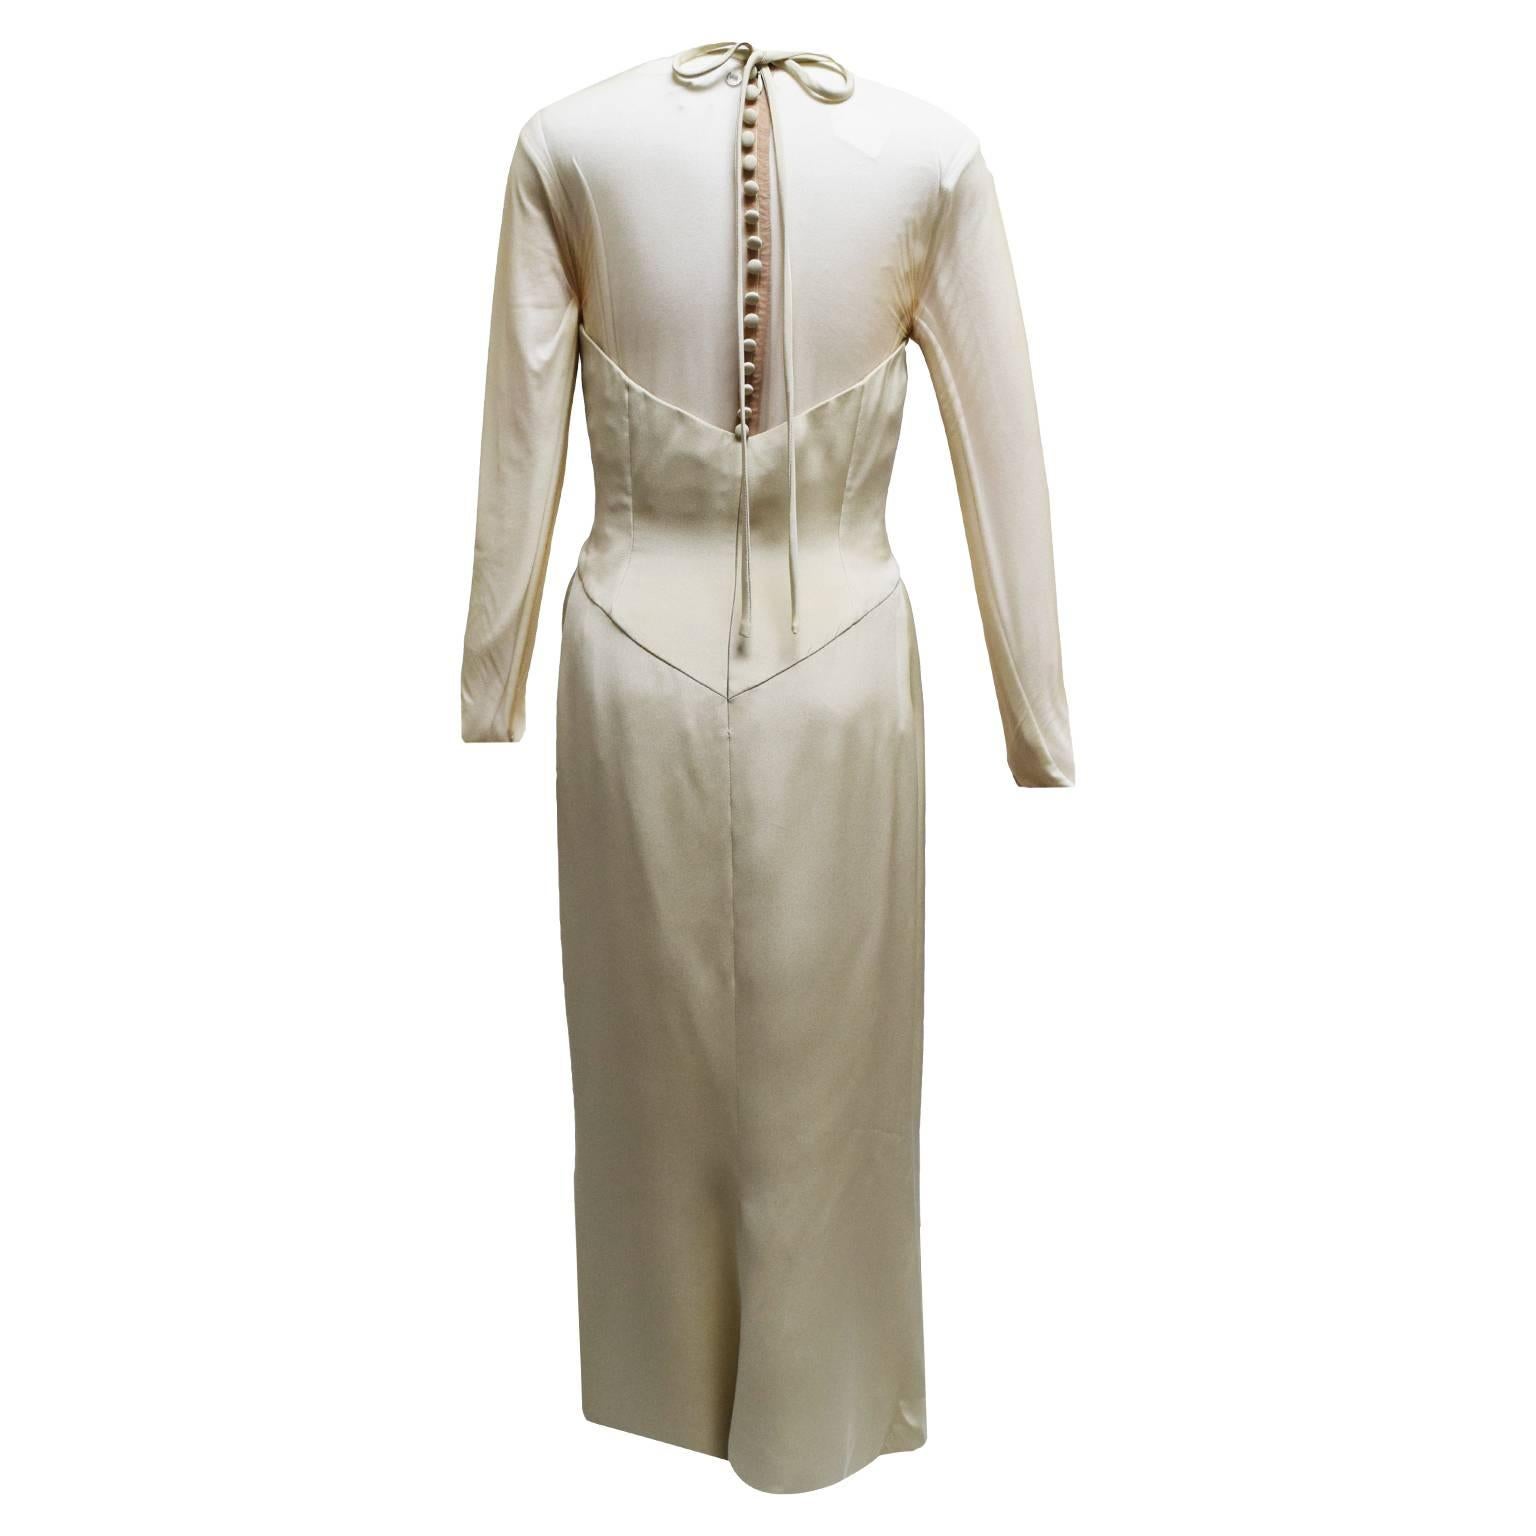 This beautiful gown by Vera Wang is made out of beige satin and is fully lined. The dress is a elegant sheath dress with empire waist and a jeweled neckline.  The dress is long sleeved, and the back has a delicate buttoned closure, a satin neck tie,